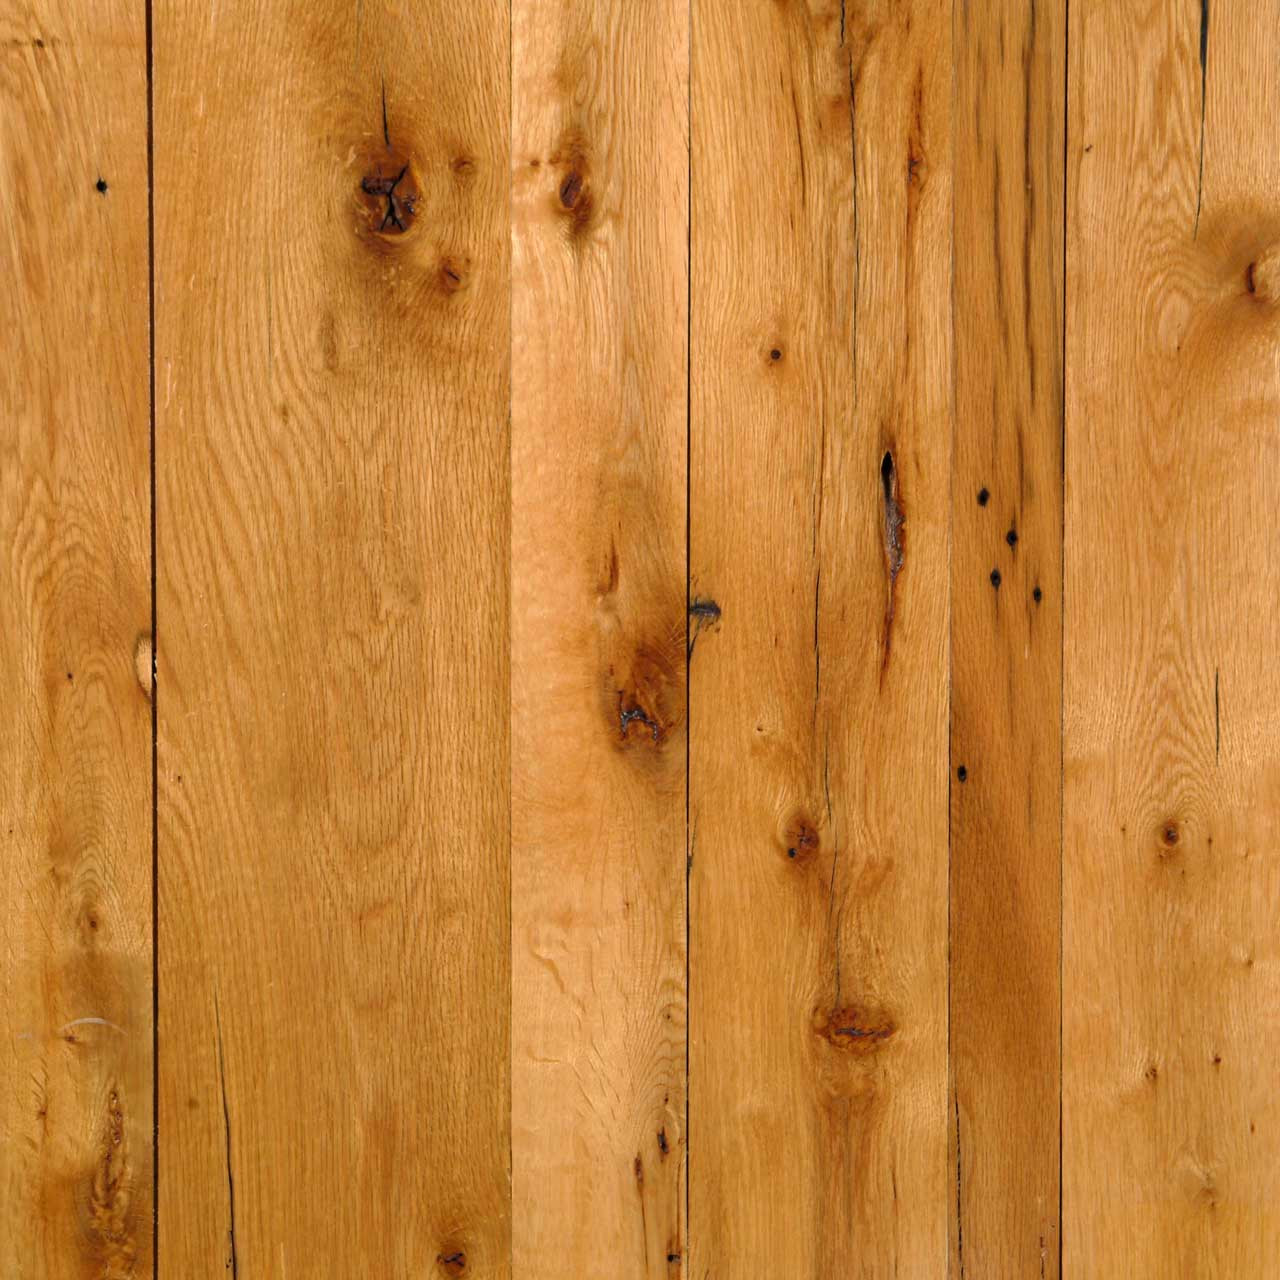 21 Unique 3 4 Inch Maple Hardwood Flooring 2024 free download 3 4 inch maple hardwood flooring of longleaf lumber reclaimed red white oak wood in reclaimed white oak wood flooring